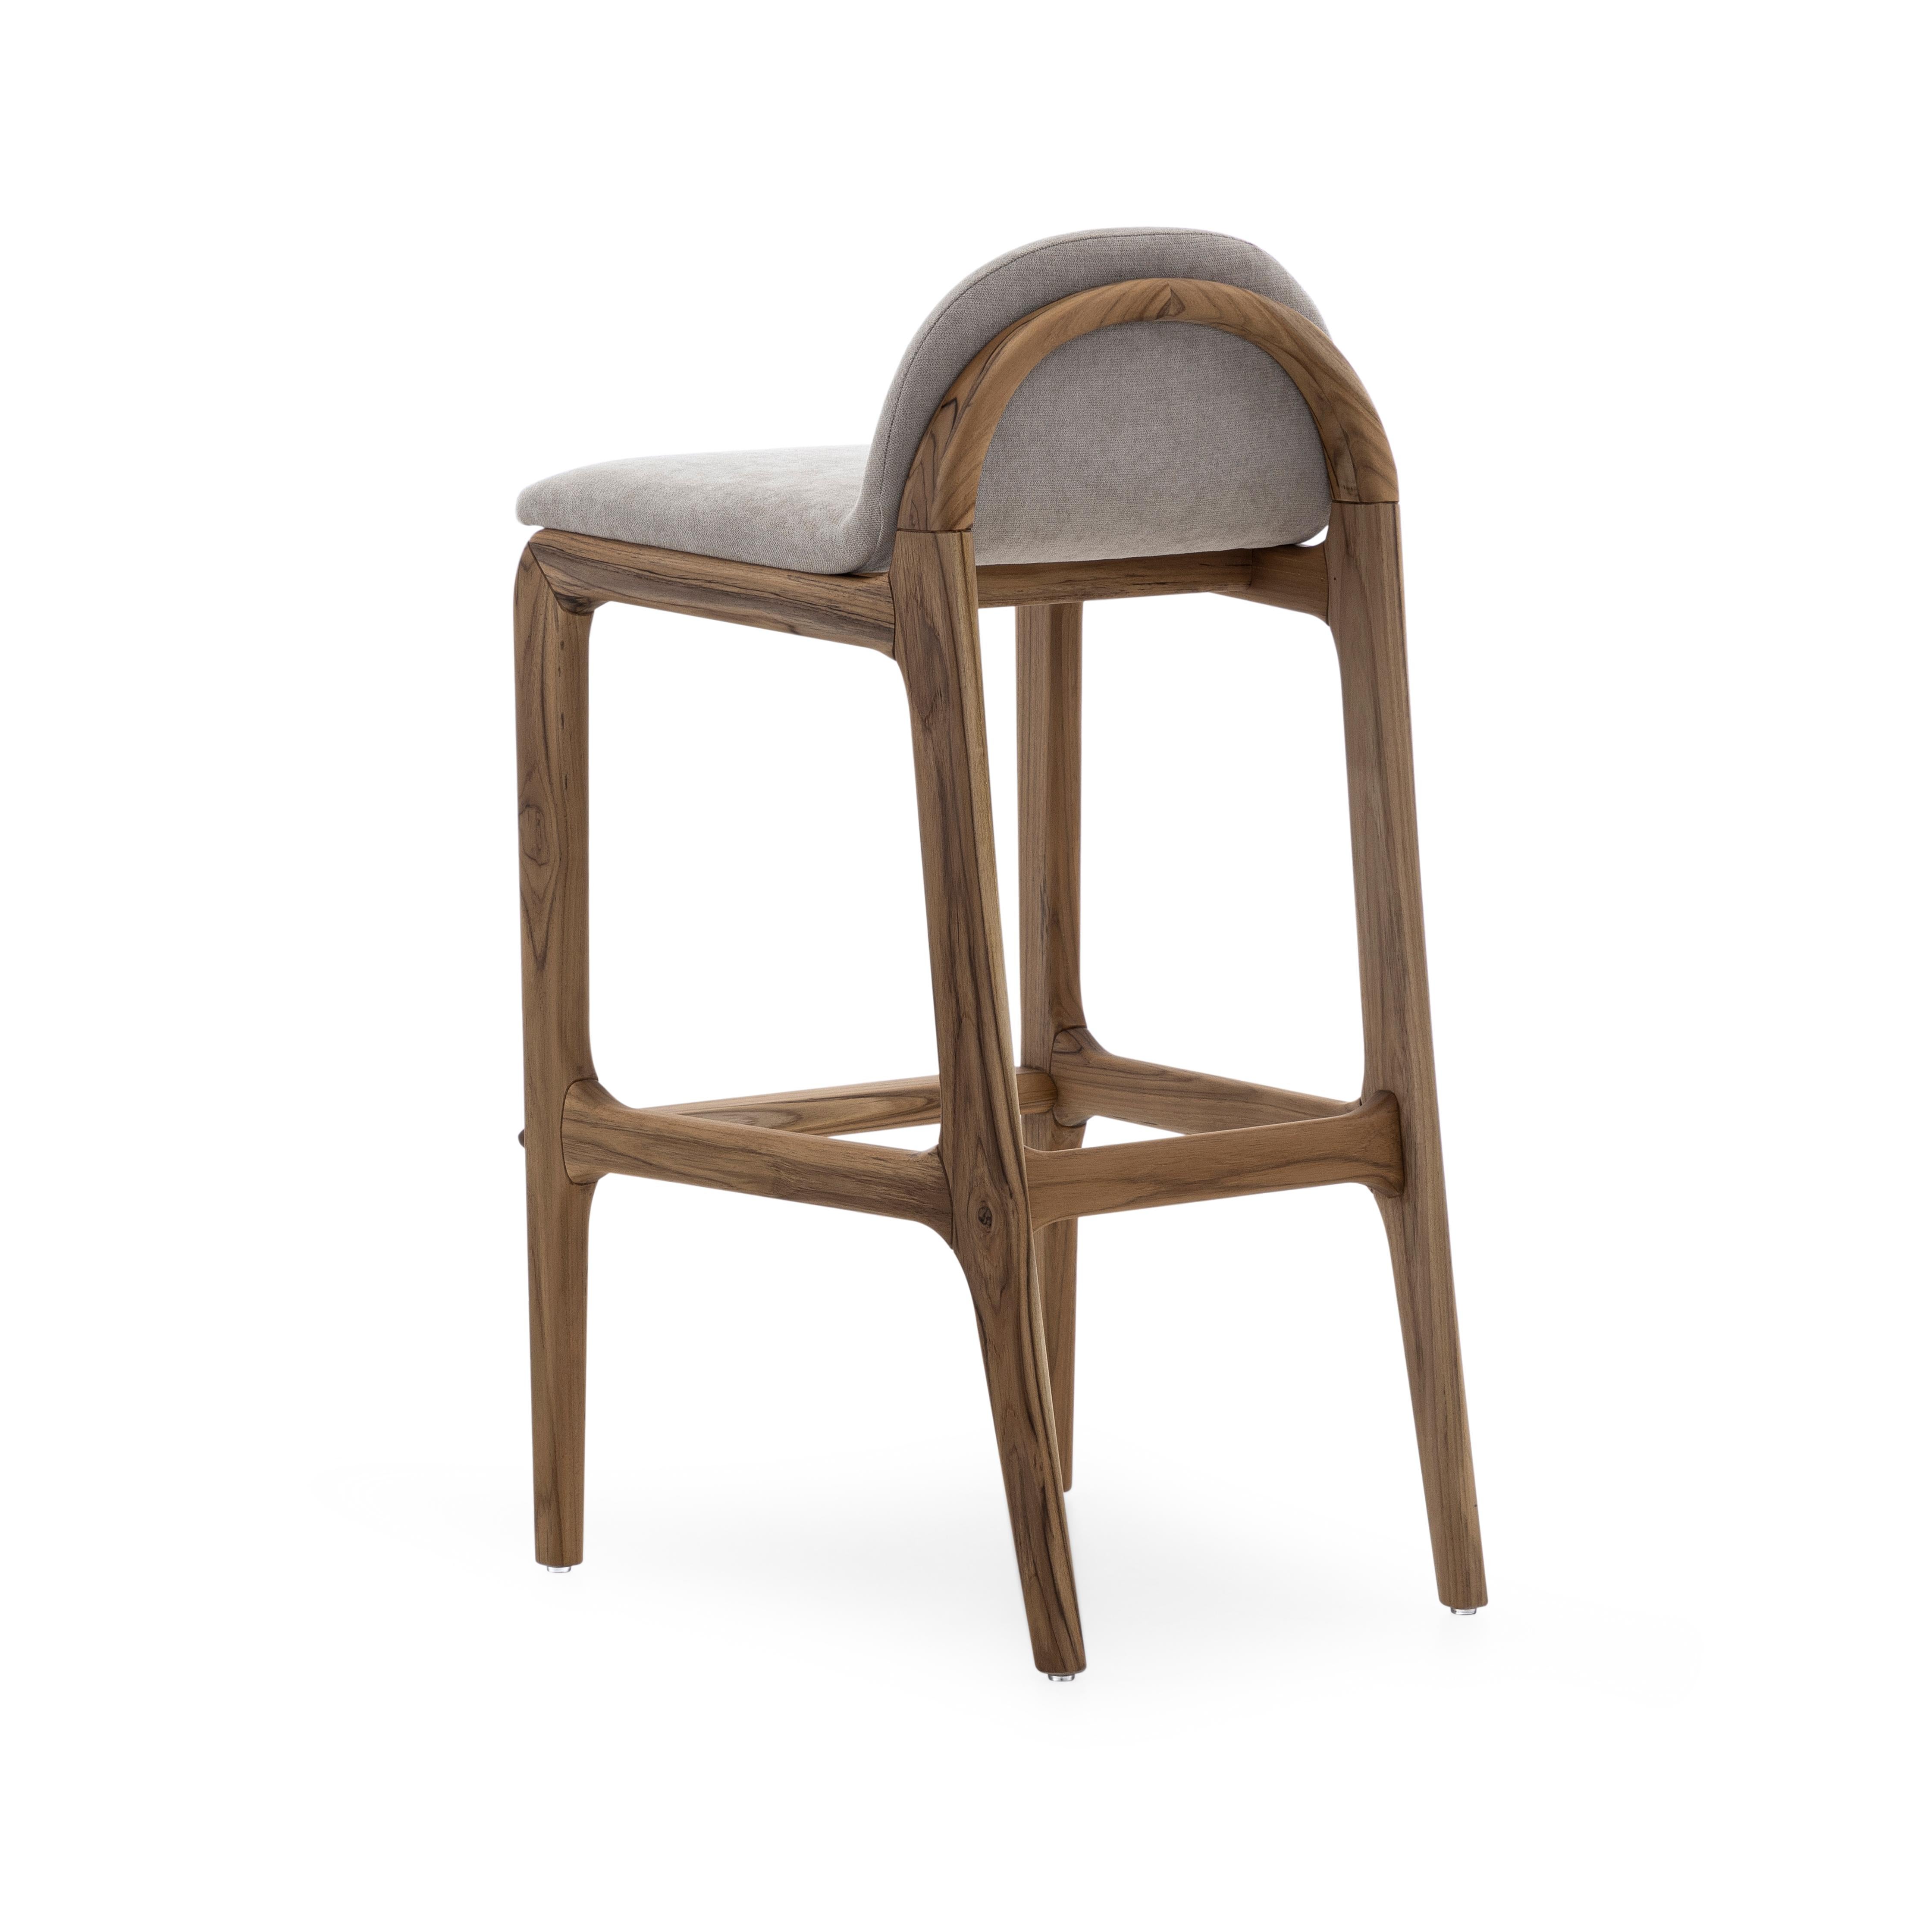 Ura Counter Stool in Teak Wood Finish Base and Upholstered Light Grey Seat In New Condition For Sale In Miami, FL